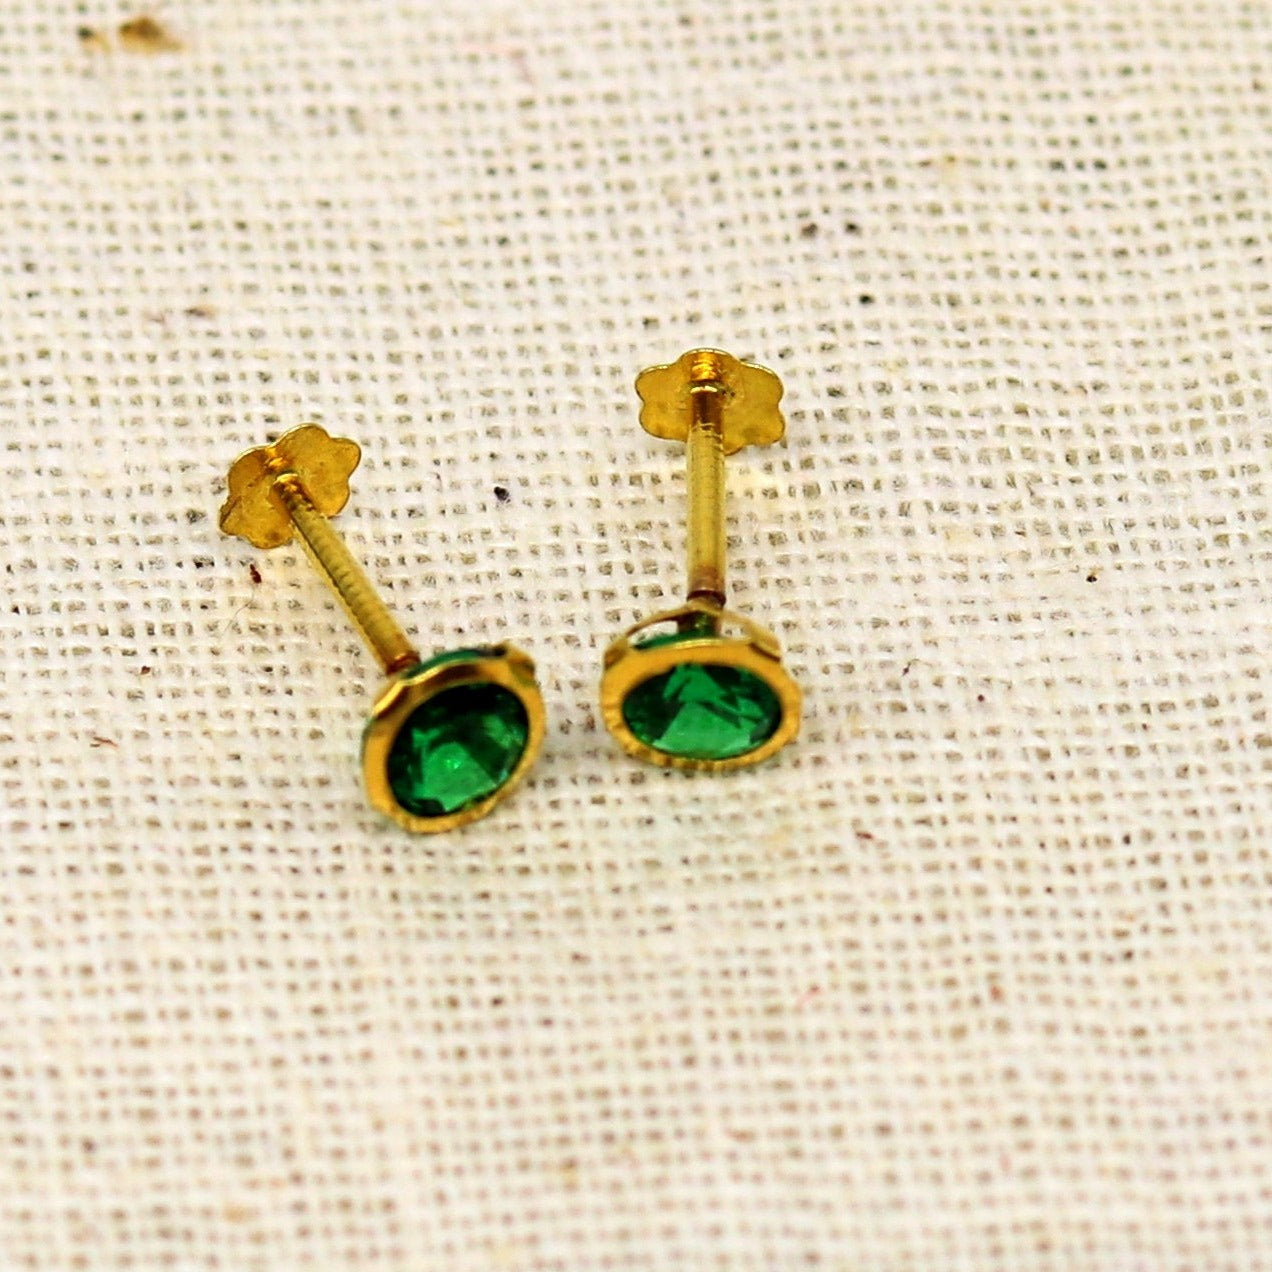 4.2mm 18k yellow gold handmade fabulous green cubic zircon stone excellent antique vintage design stud earrings pair unisex jewelry er113 - TRIBAL ORNAMENTS